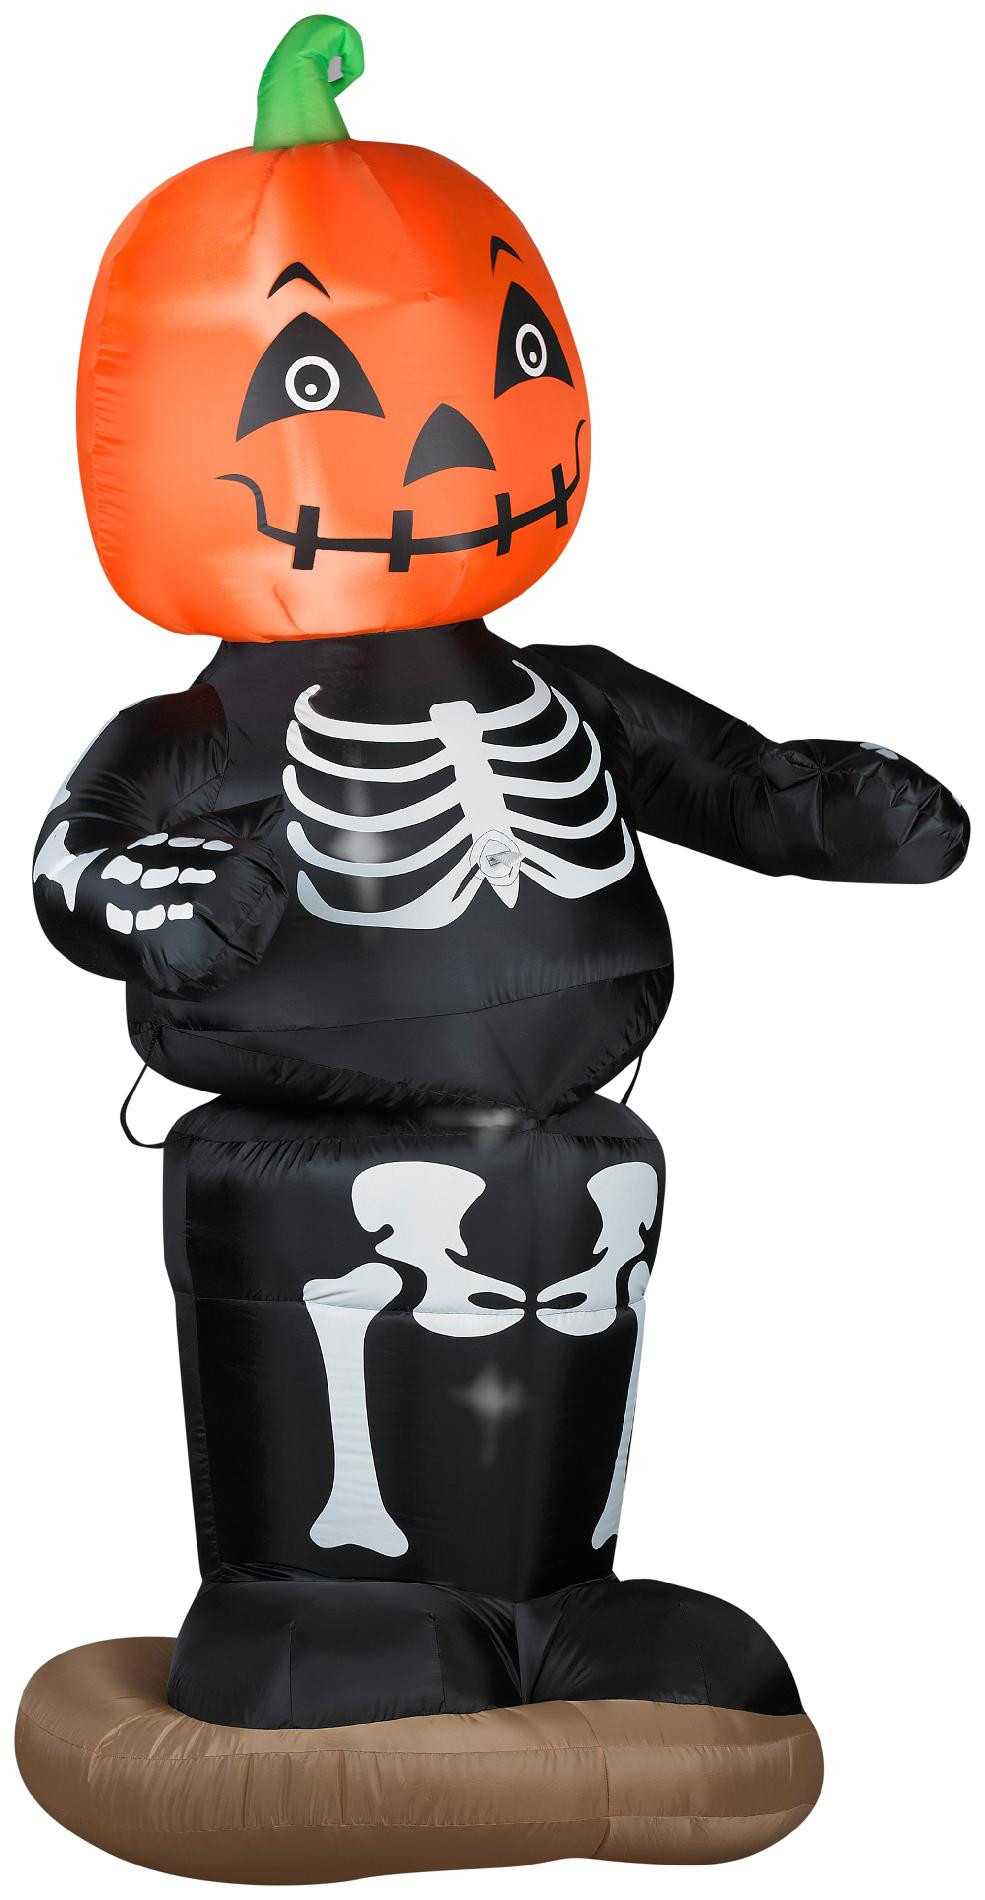 Halloween Outdoor Inflatables
 Halloween Decor Preview What’s Hot This Year